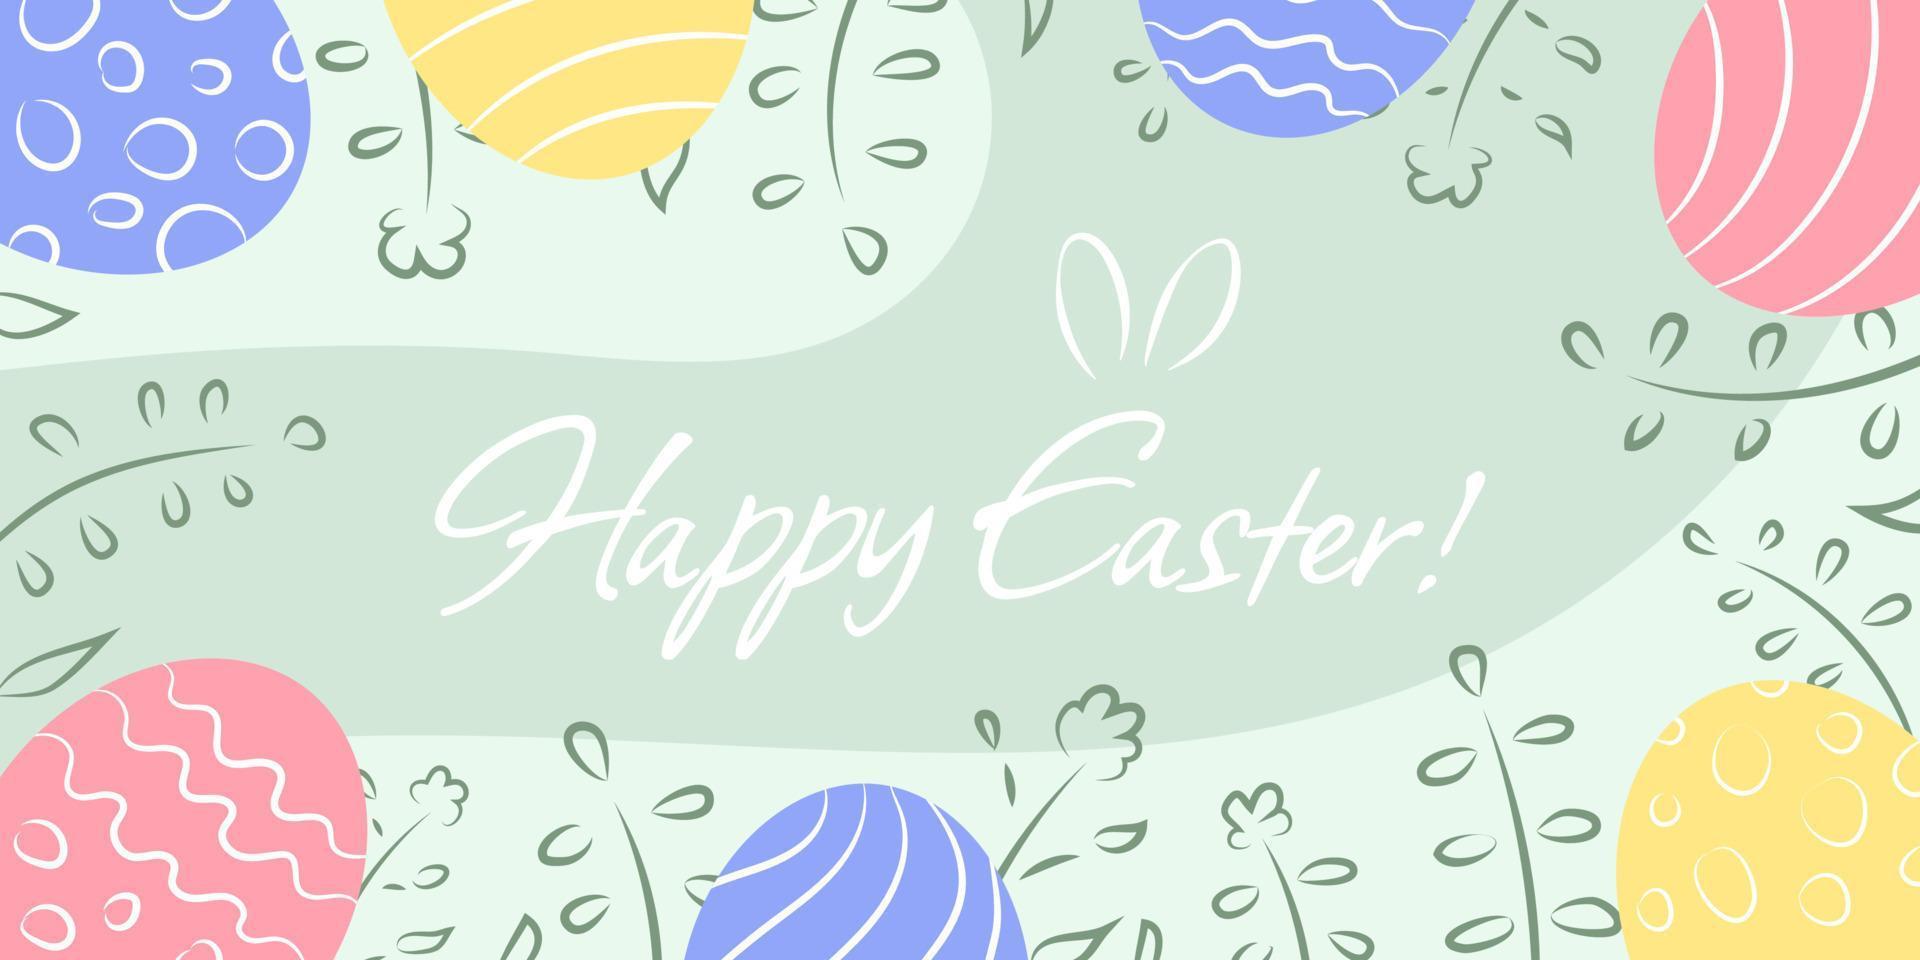 Easter holiday banner with colored and decorated eggs and text with cute rabbit ears, invitation, greeting card vector